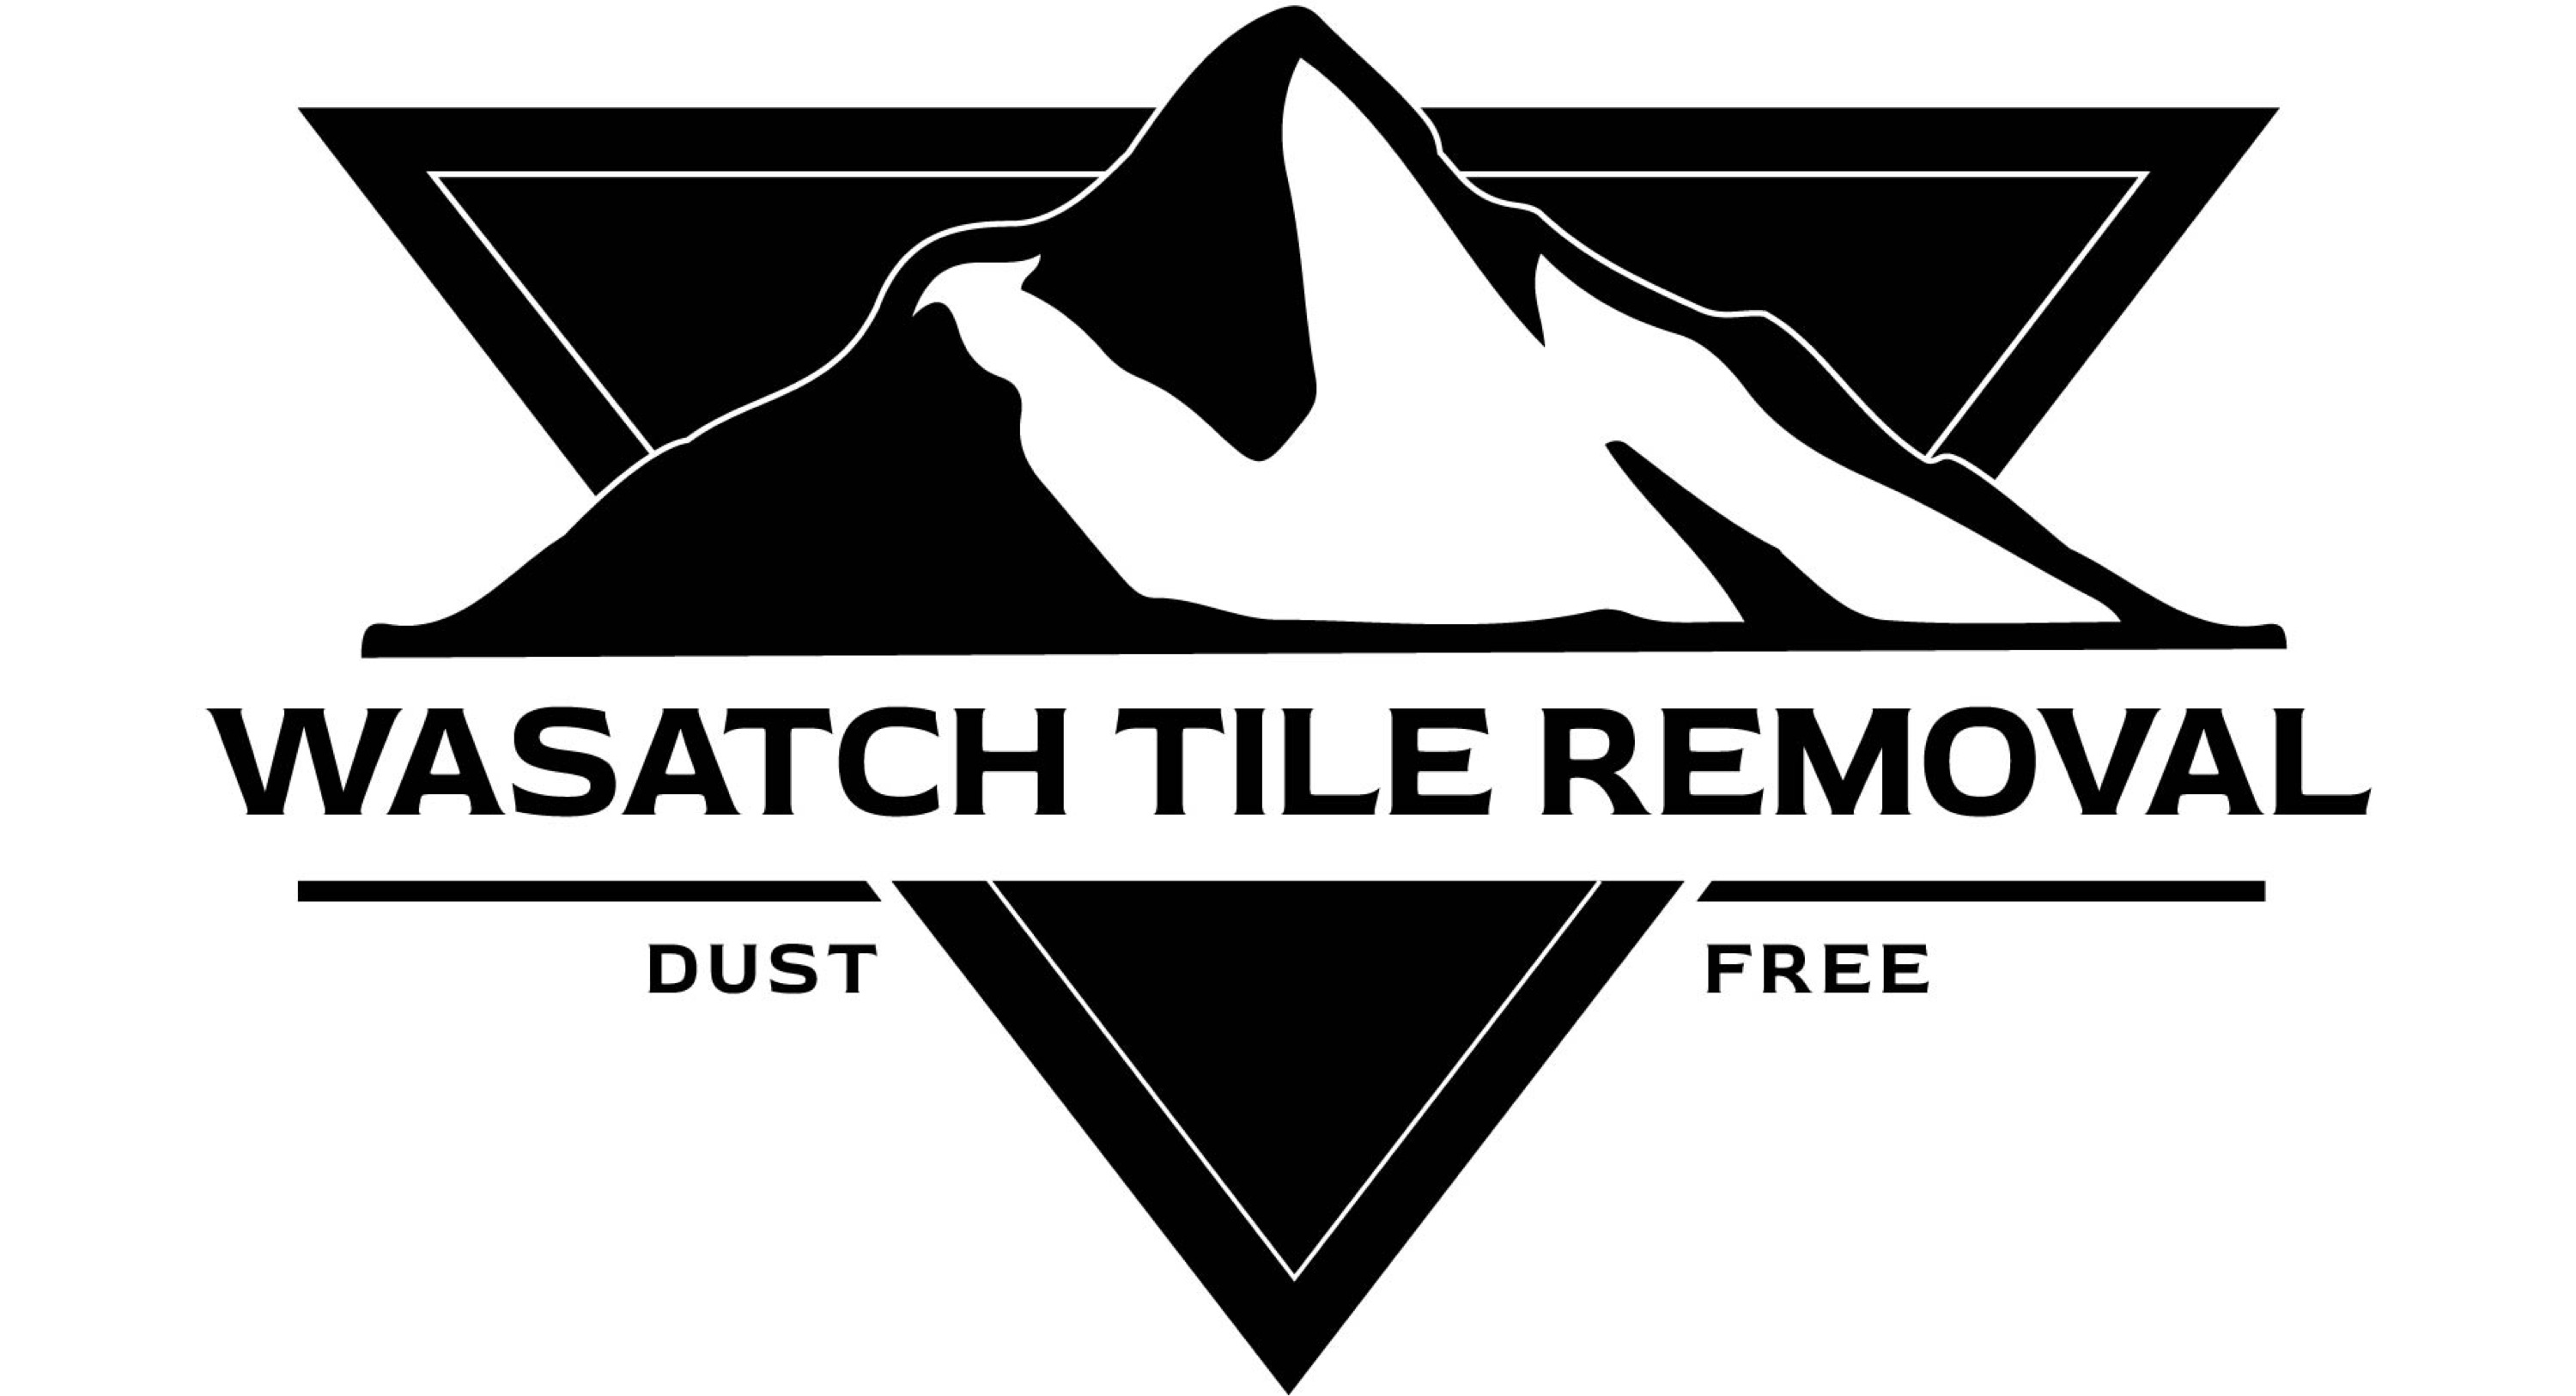 Wasatch Tile Removal Company Logo